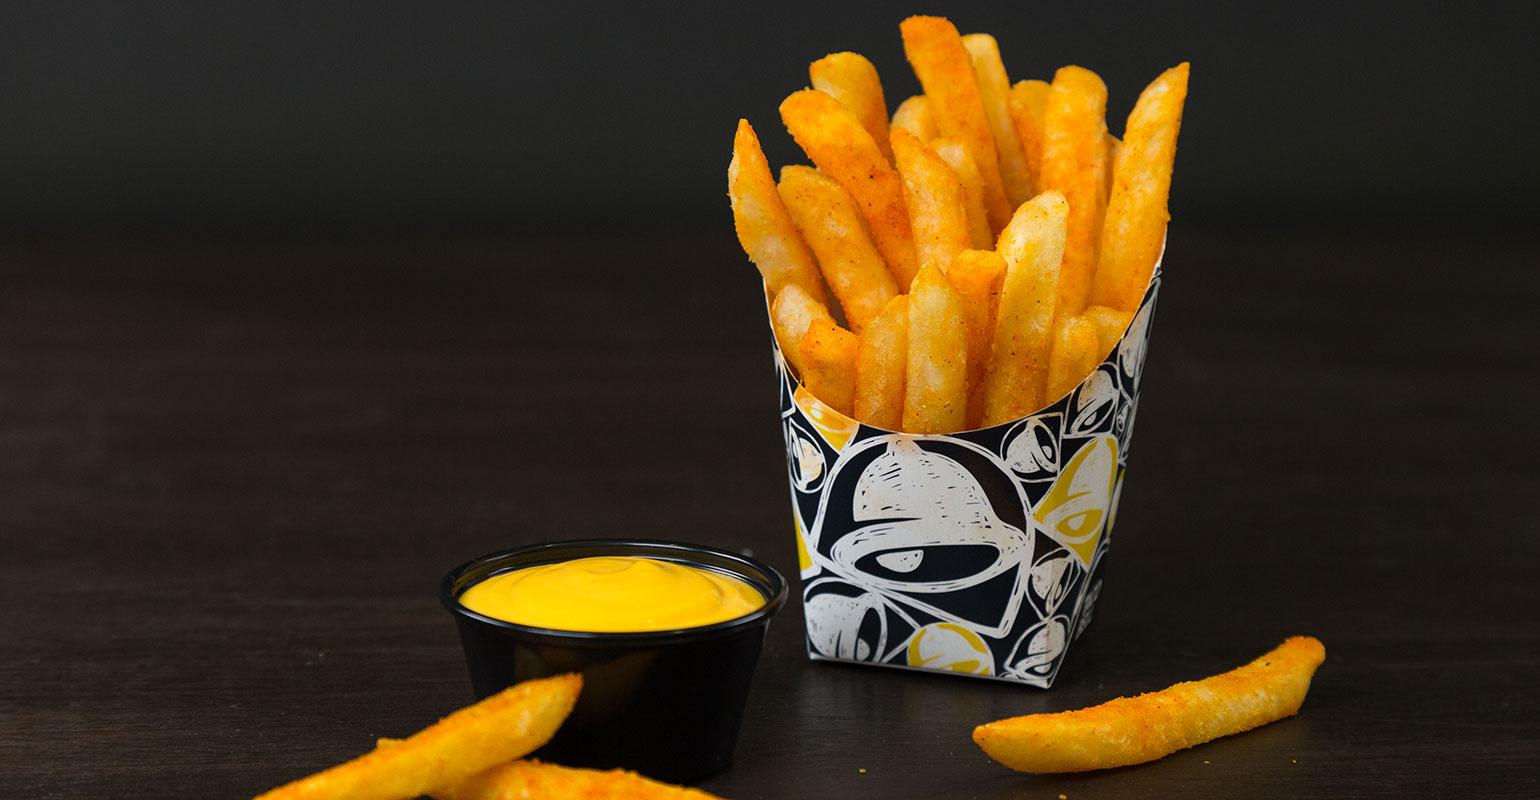 Taco Bell to bring back Nacho Fries for third time Nation's